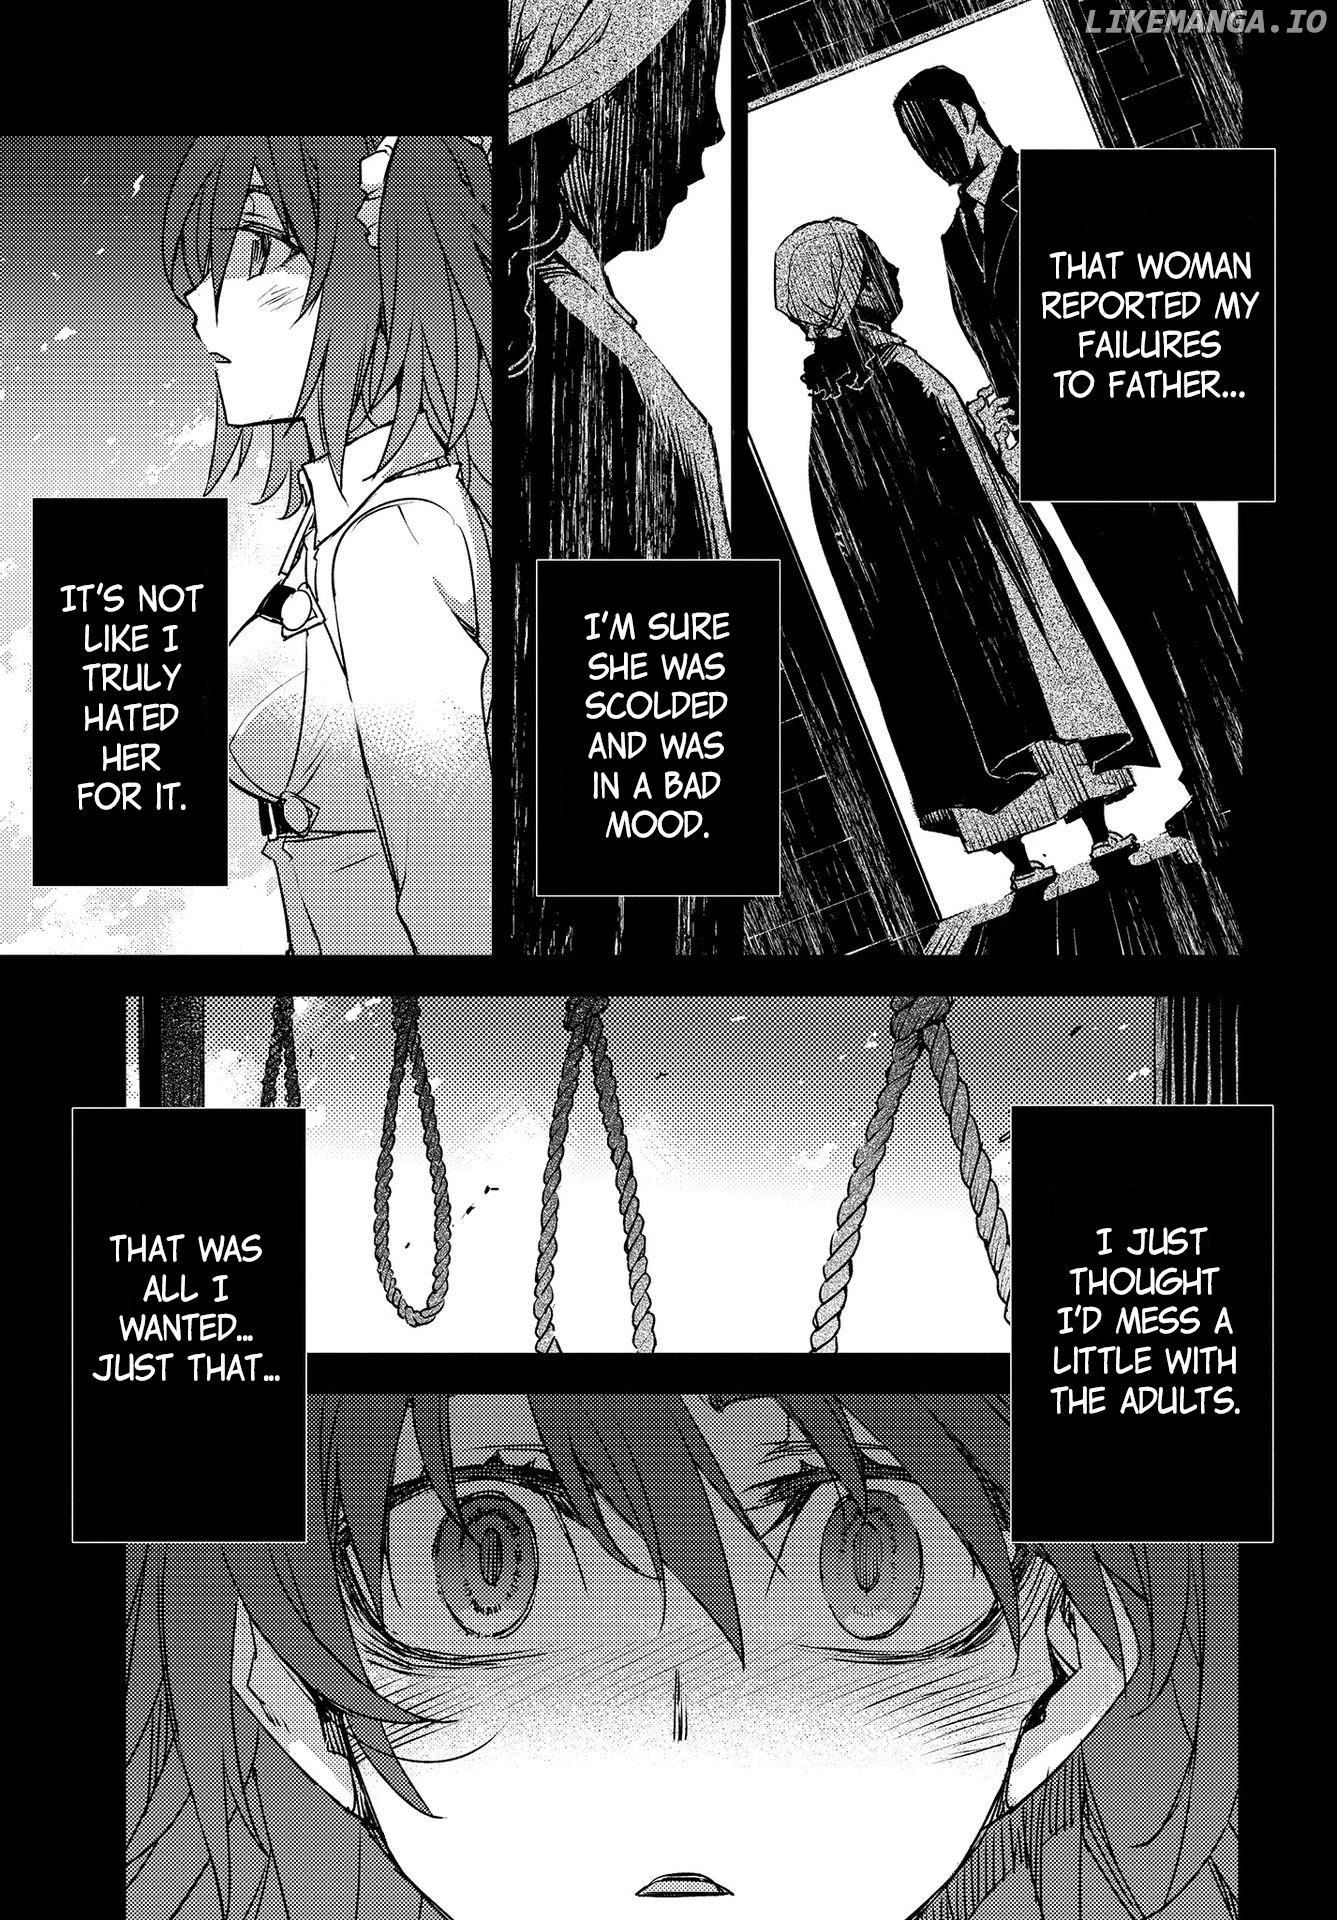 Fate/Grand Order: Epic of Remnant - Subspecies Singularity IV: Taboo Advent Salem: Salem of Heresy chapter 10 - page 9